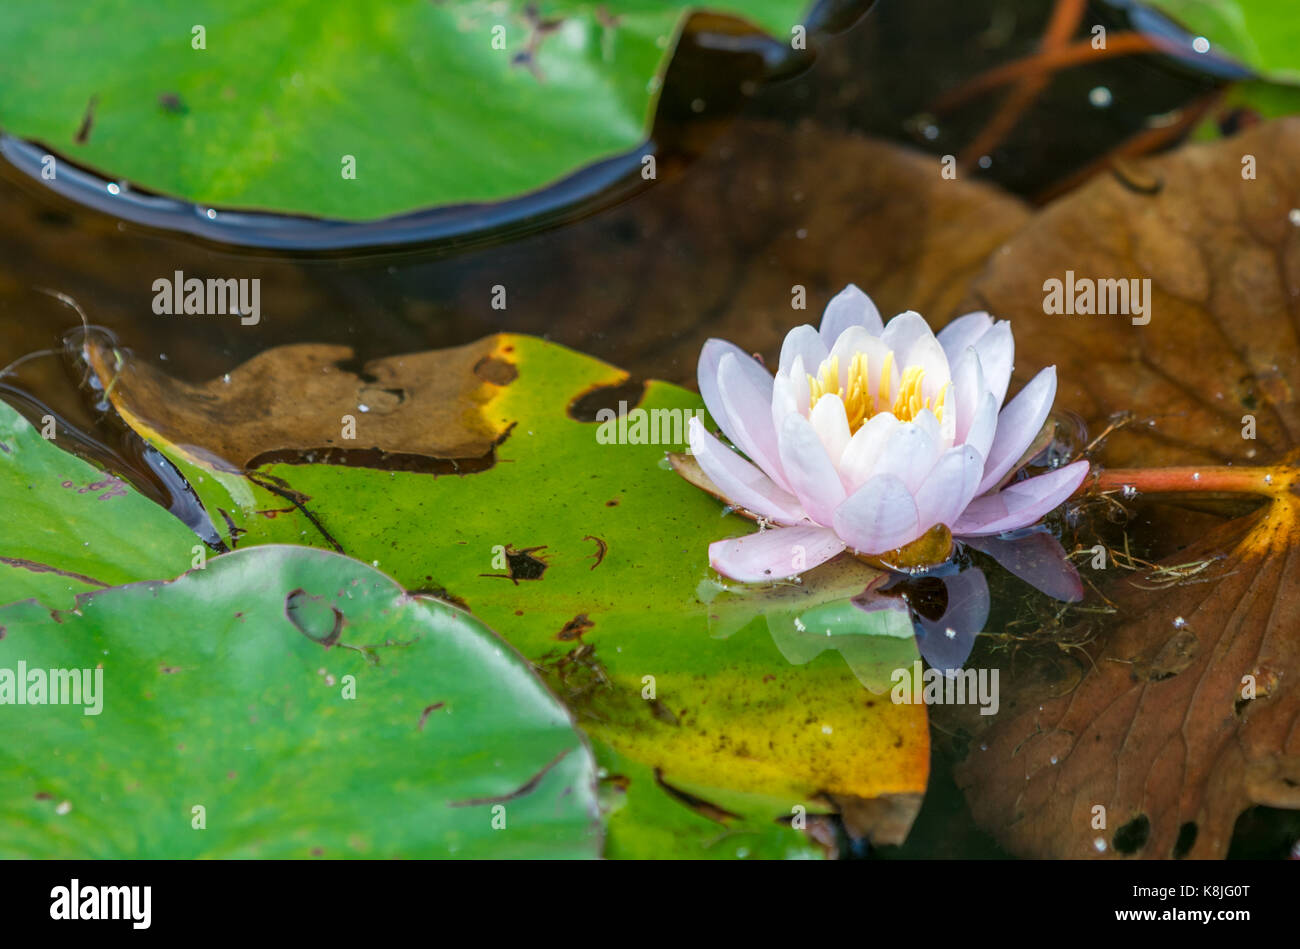 water lilly with flower, detailed image, southampton, ny Stock Photo